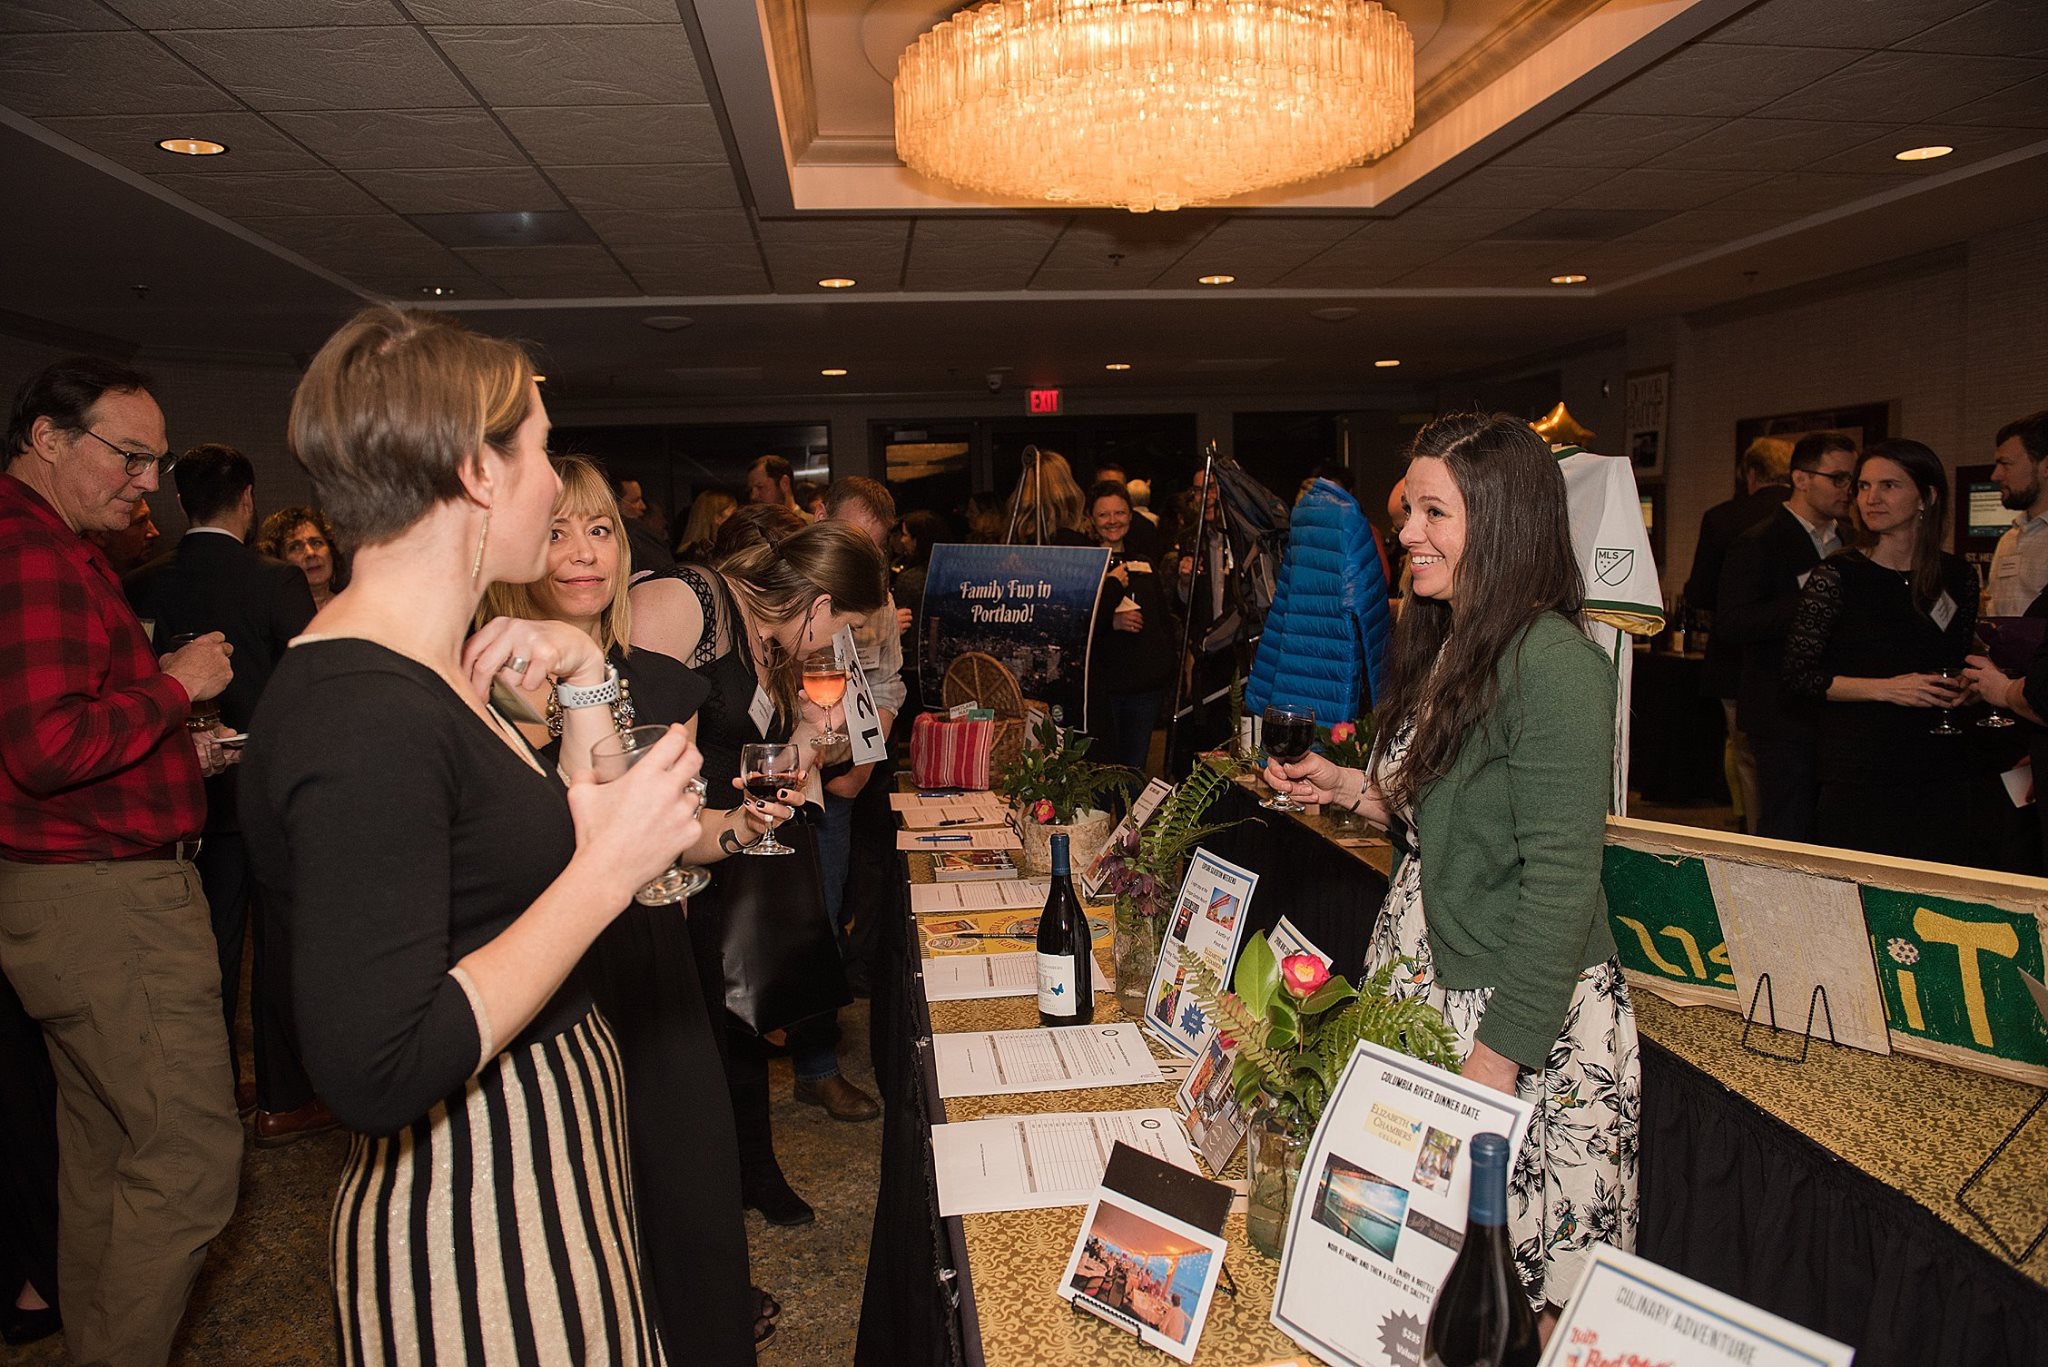 women discusses wine options at event